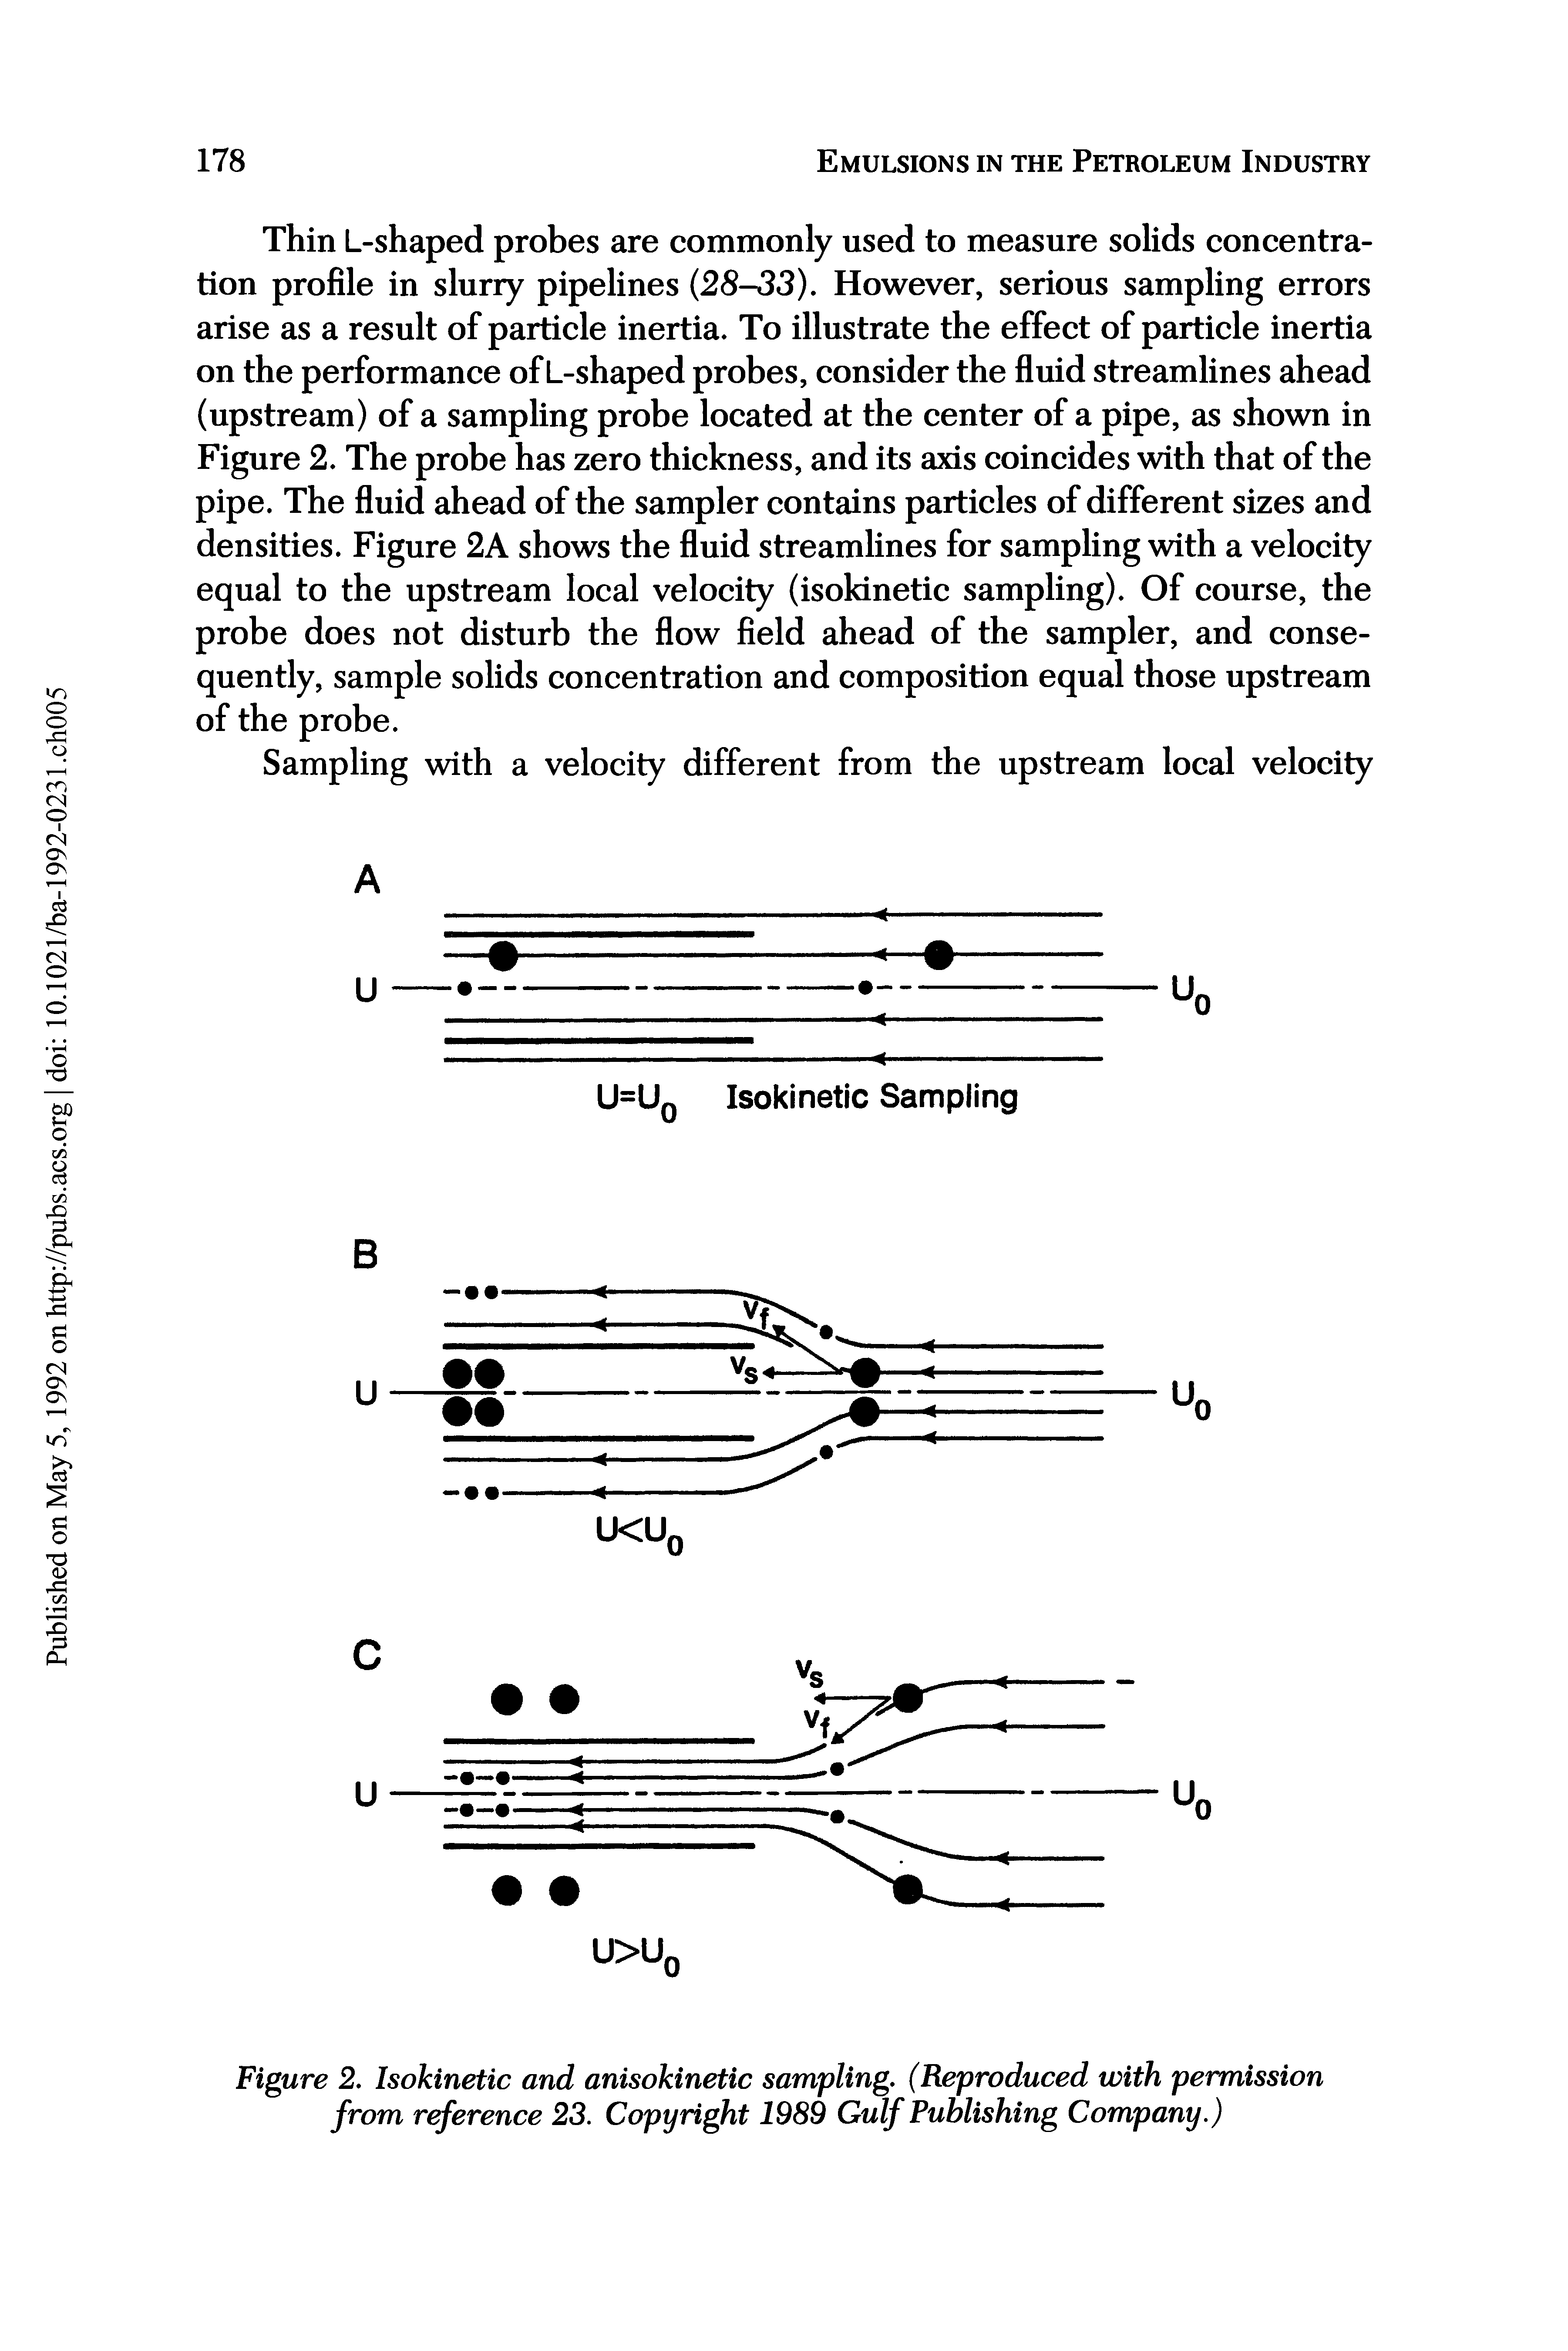 Figure 2. Isokinetic and anisokinetic sampling. (Reproduced with permission from reference 23. Copyright 1989 Gulf Publishing Company.)...